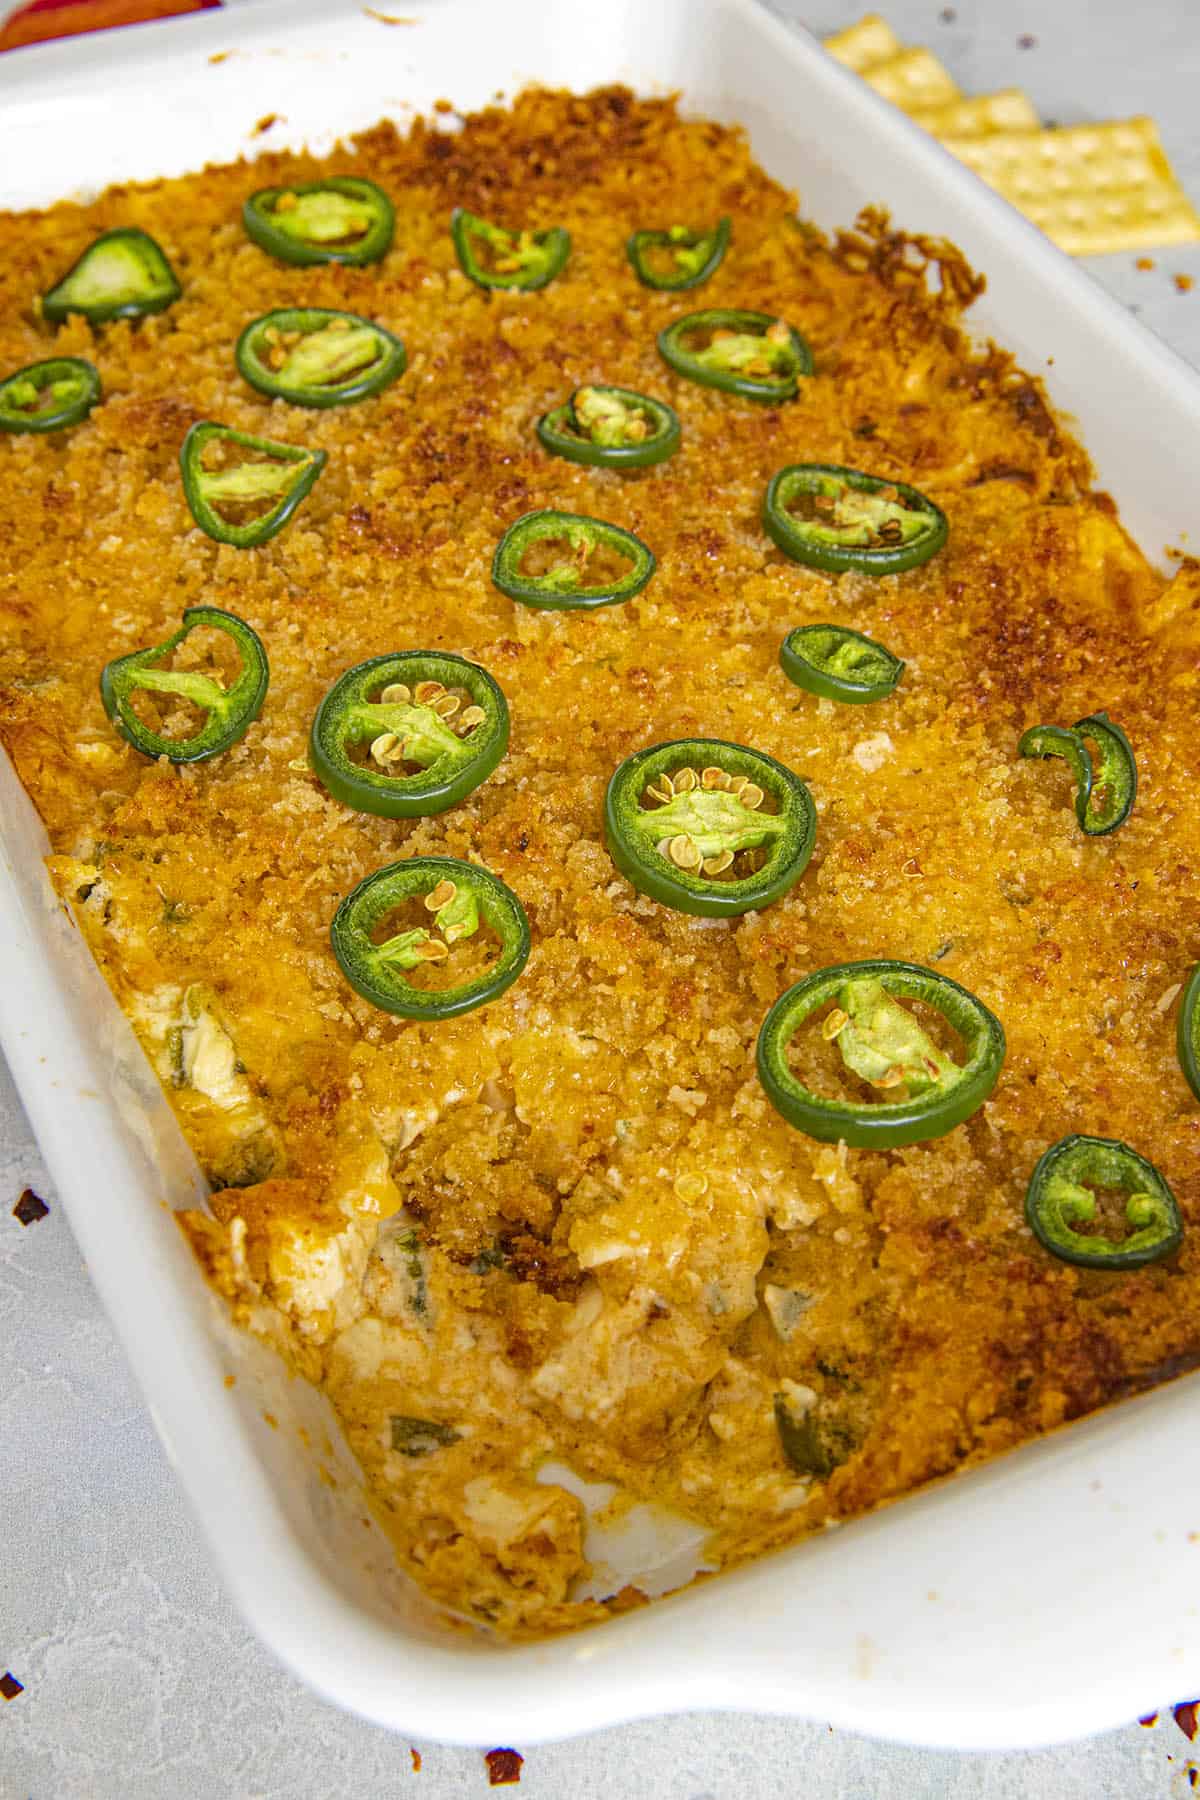 Jalapeno Popper Dip, after Mike taking a scoop